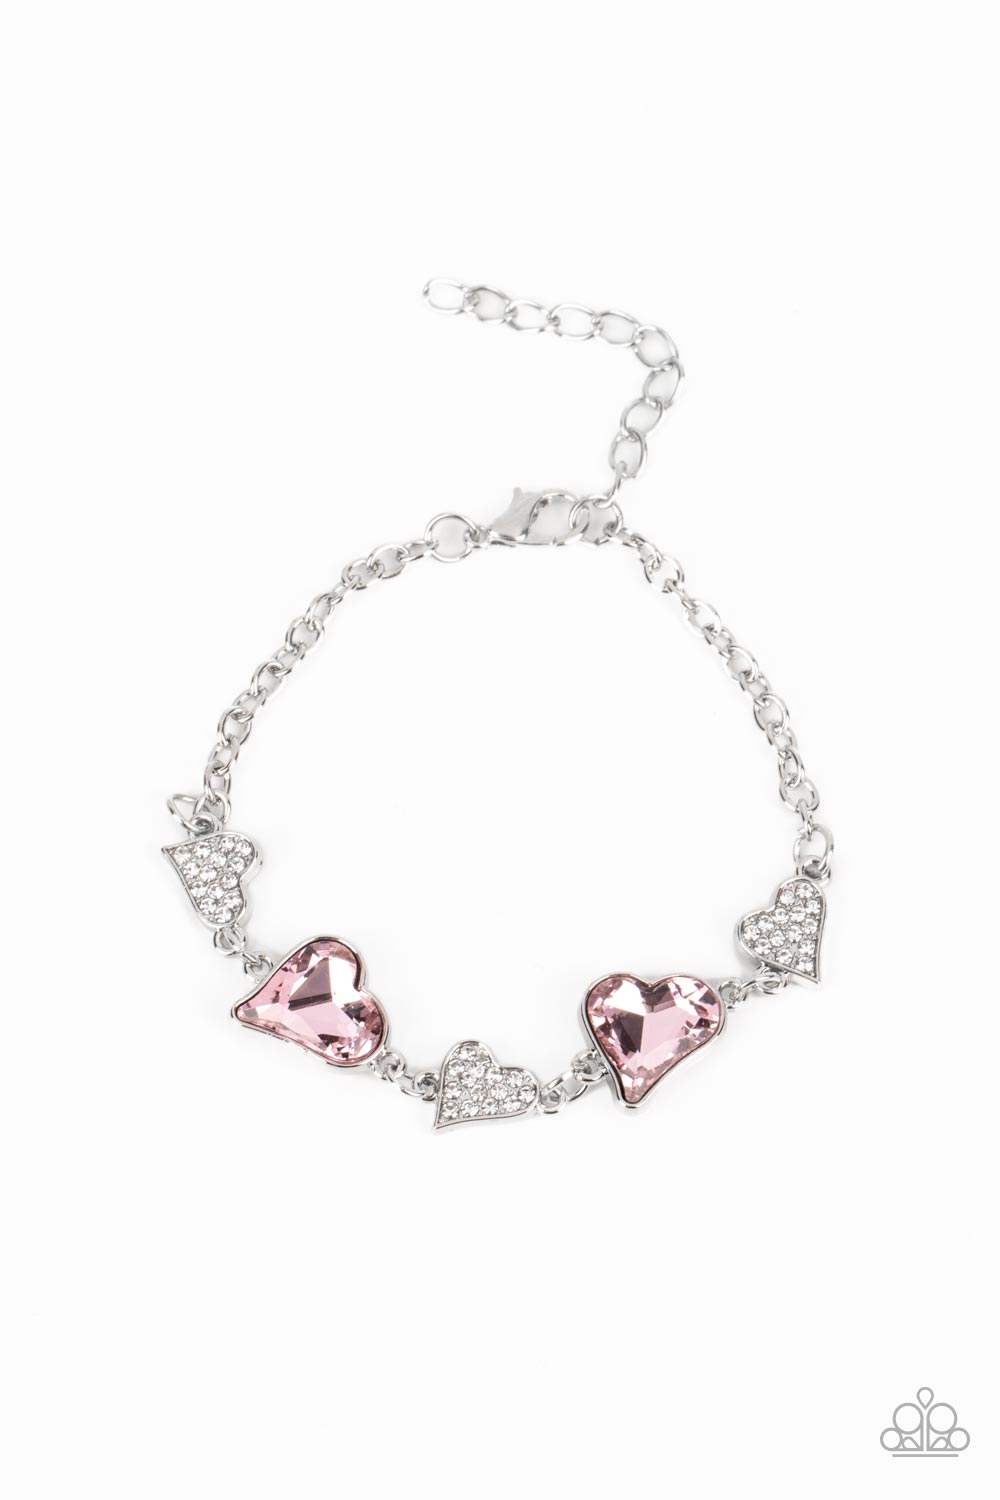 Cluelessly Crushing - Pink and Silver Heart Bracelet - Paparazzi Accessories - An asymmetrical collection of hearts coalesce around the wrist in this flirty centerpiece. Three of the silver hearts are encrusted with dainty white rhinestones, while the other two heart frames boast soft, pink gems for a sparkly finish. Features an adjustable clasp closure. Sold as one individual bracelet.